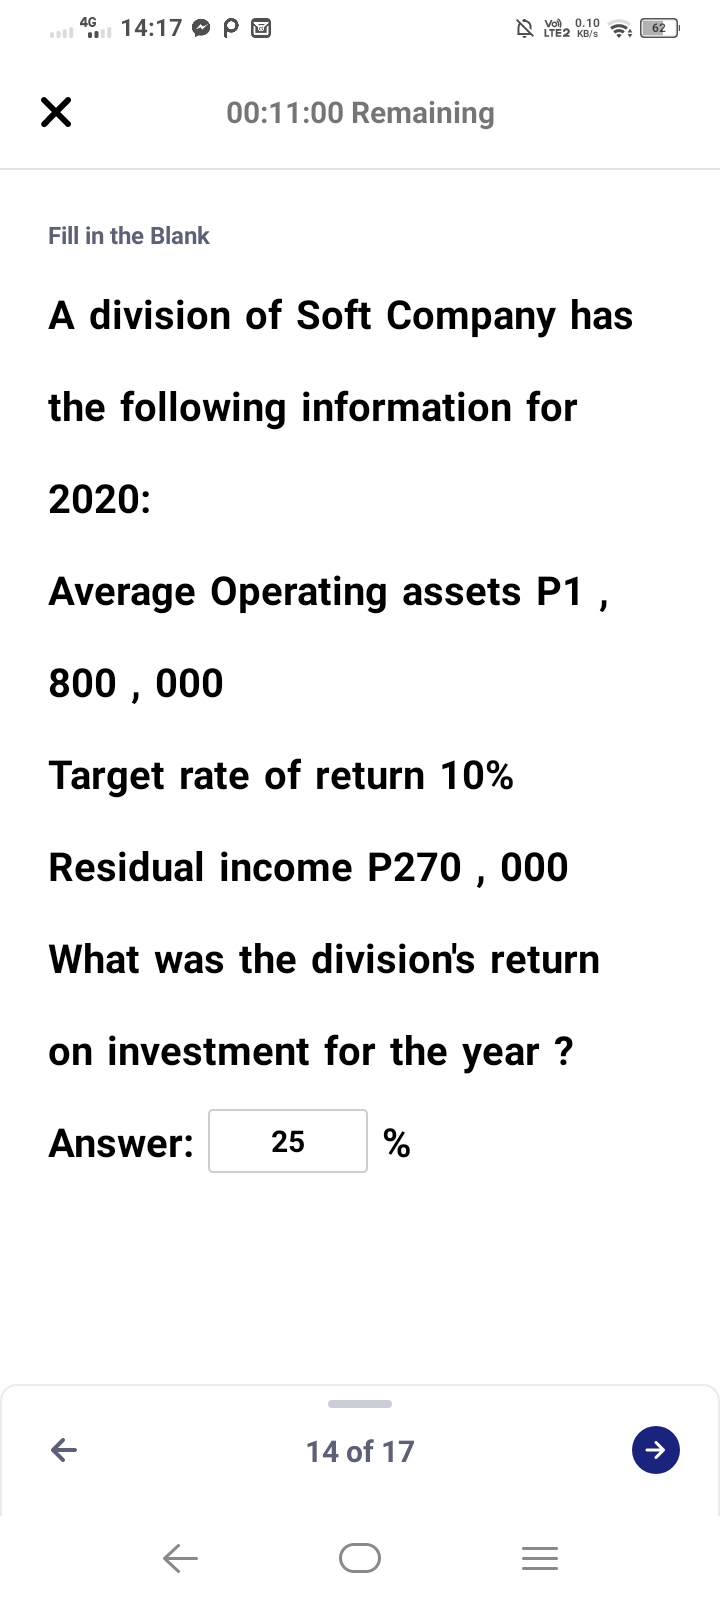 4G
14:17 O P O
A YE2 KB/S
Vo). 0.10
62
00:11:00 Remaining
Fill in the Blank
A division of Soft Company has
the following information for
2020:
Average Operating assets P1,
800 , 000
Target rate of return 10%
Residual income P270 , 000
What was the division's return
on investment for the year ?
Answer:
25
%
14 of 17
